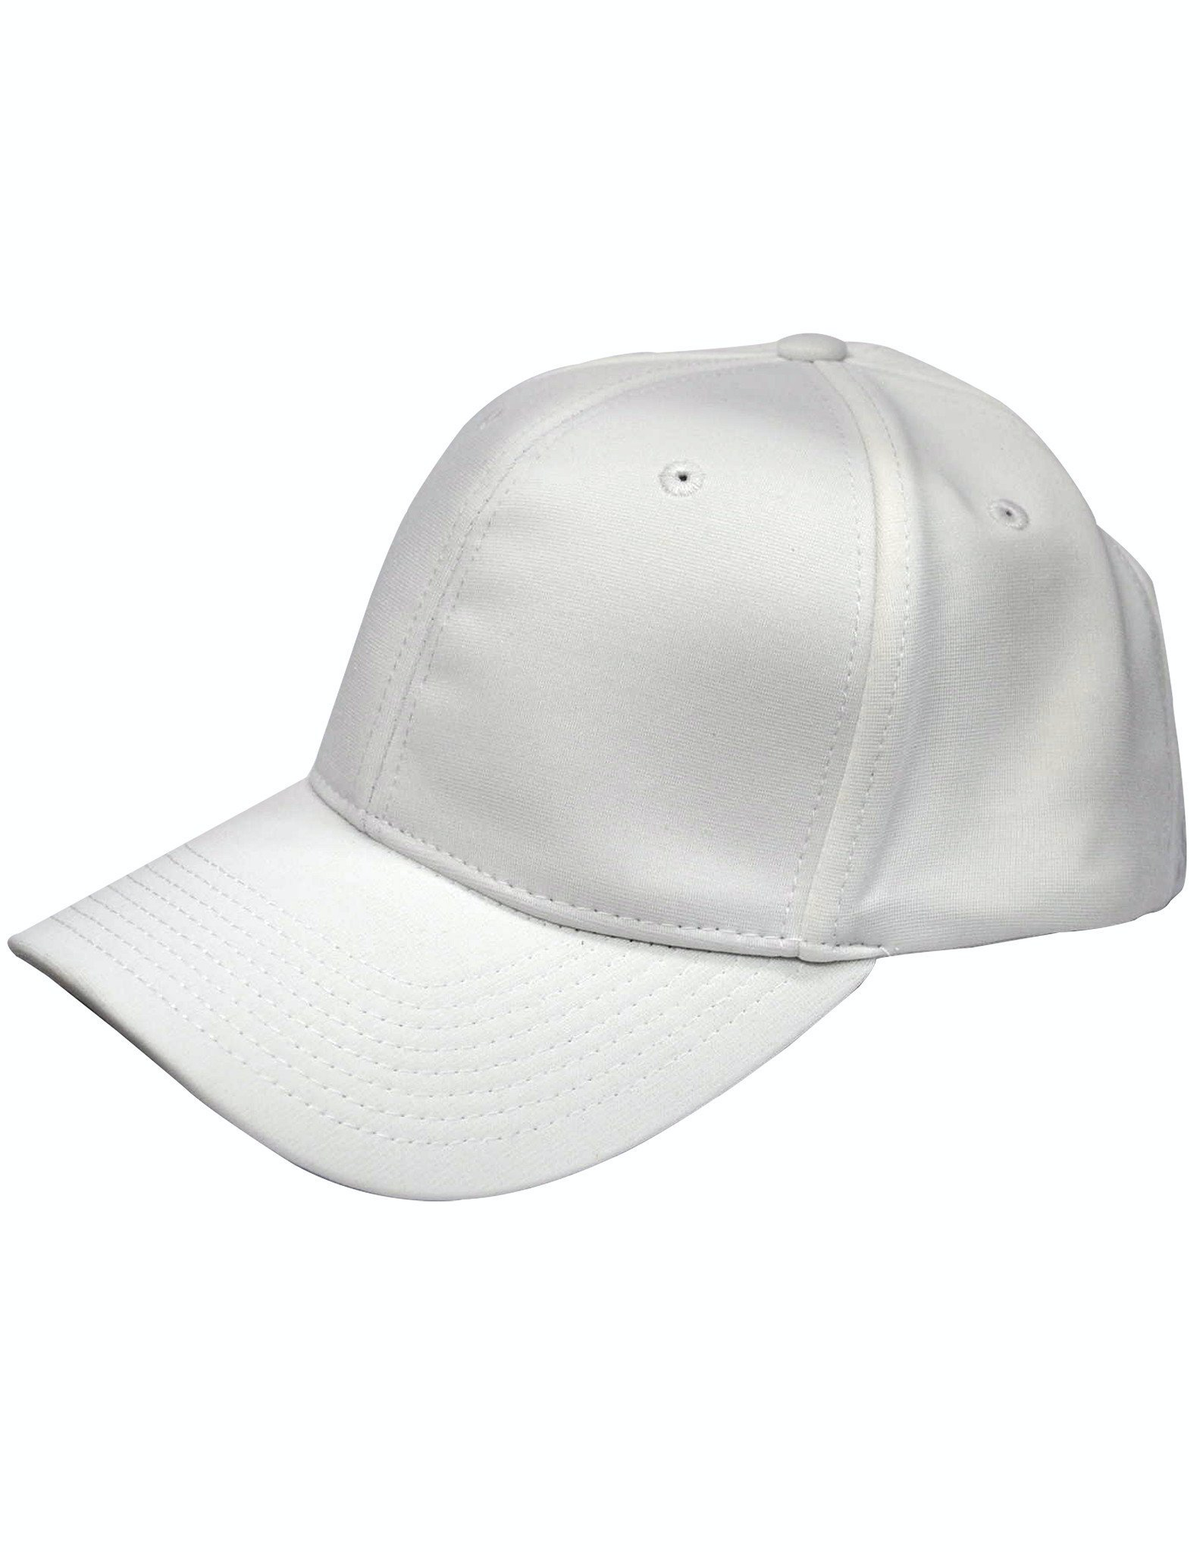 Smitty | HT-101 | Solid White | Flex Fit Referee Hat